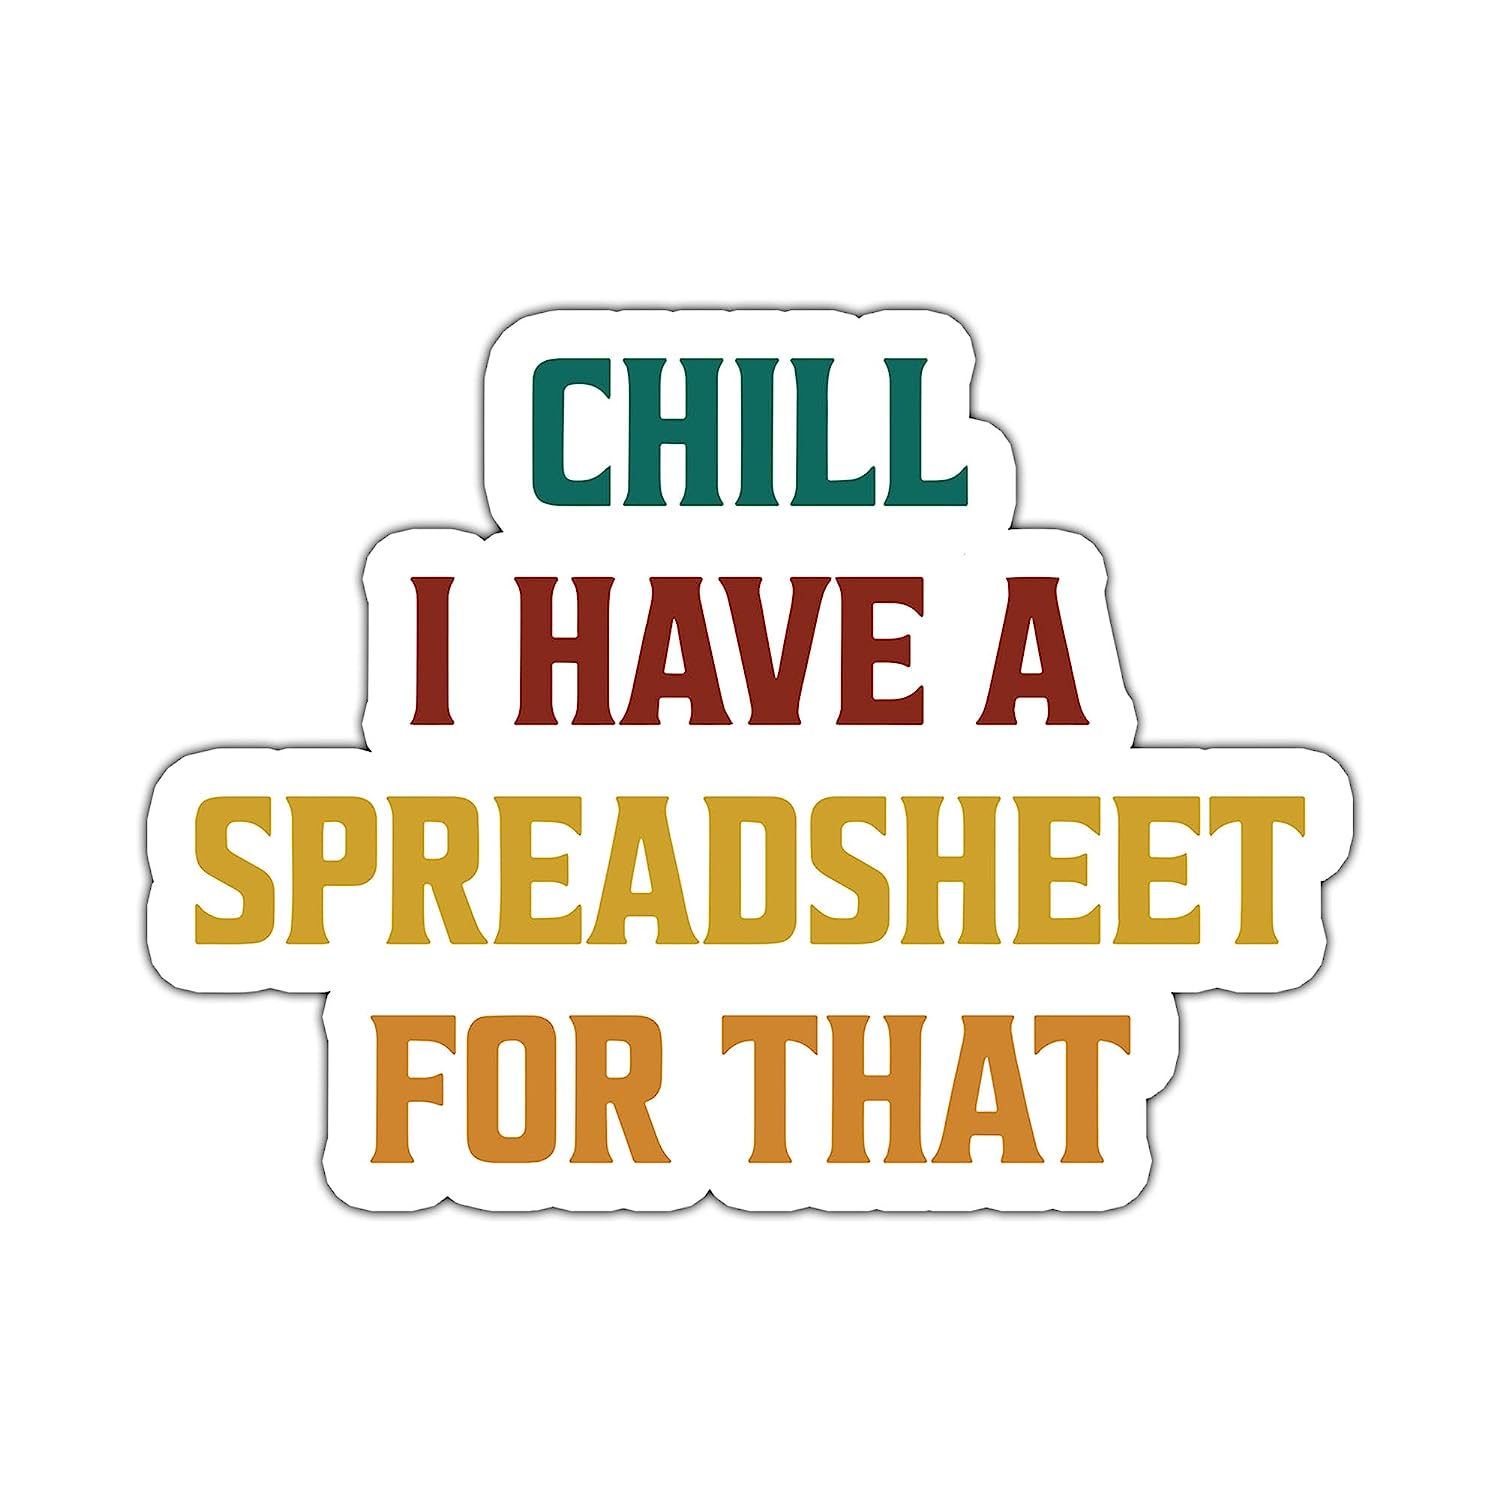 Akira Chill, I Have A Spreadsheet For That Stickers, [...]